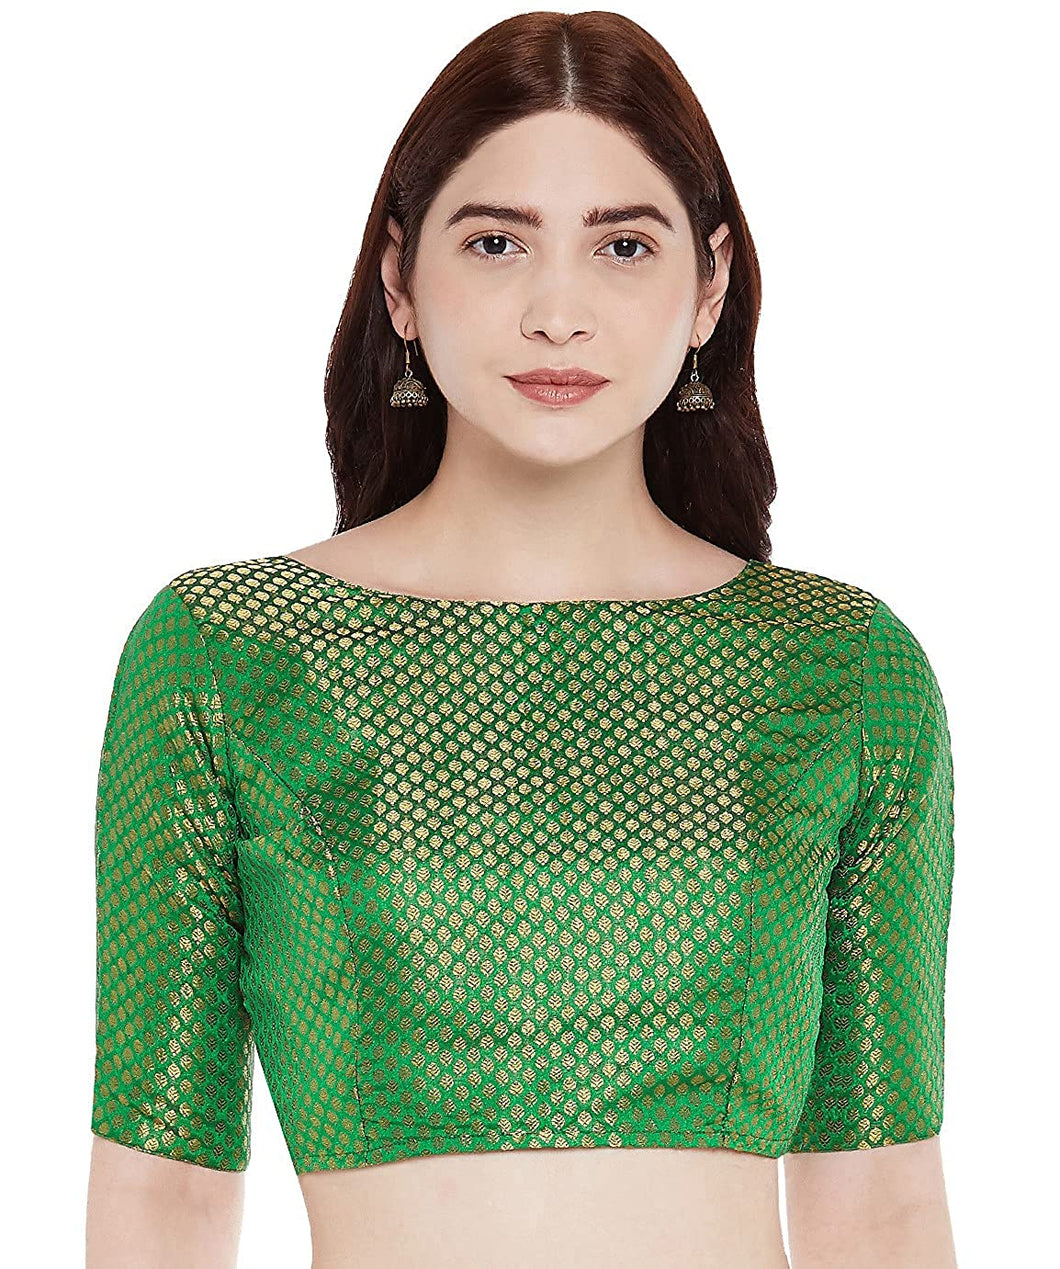 Green Brocade Saree Blouse with Elbow Length Sleeves